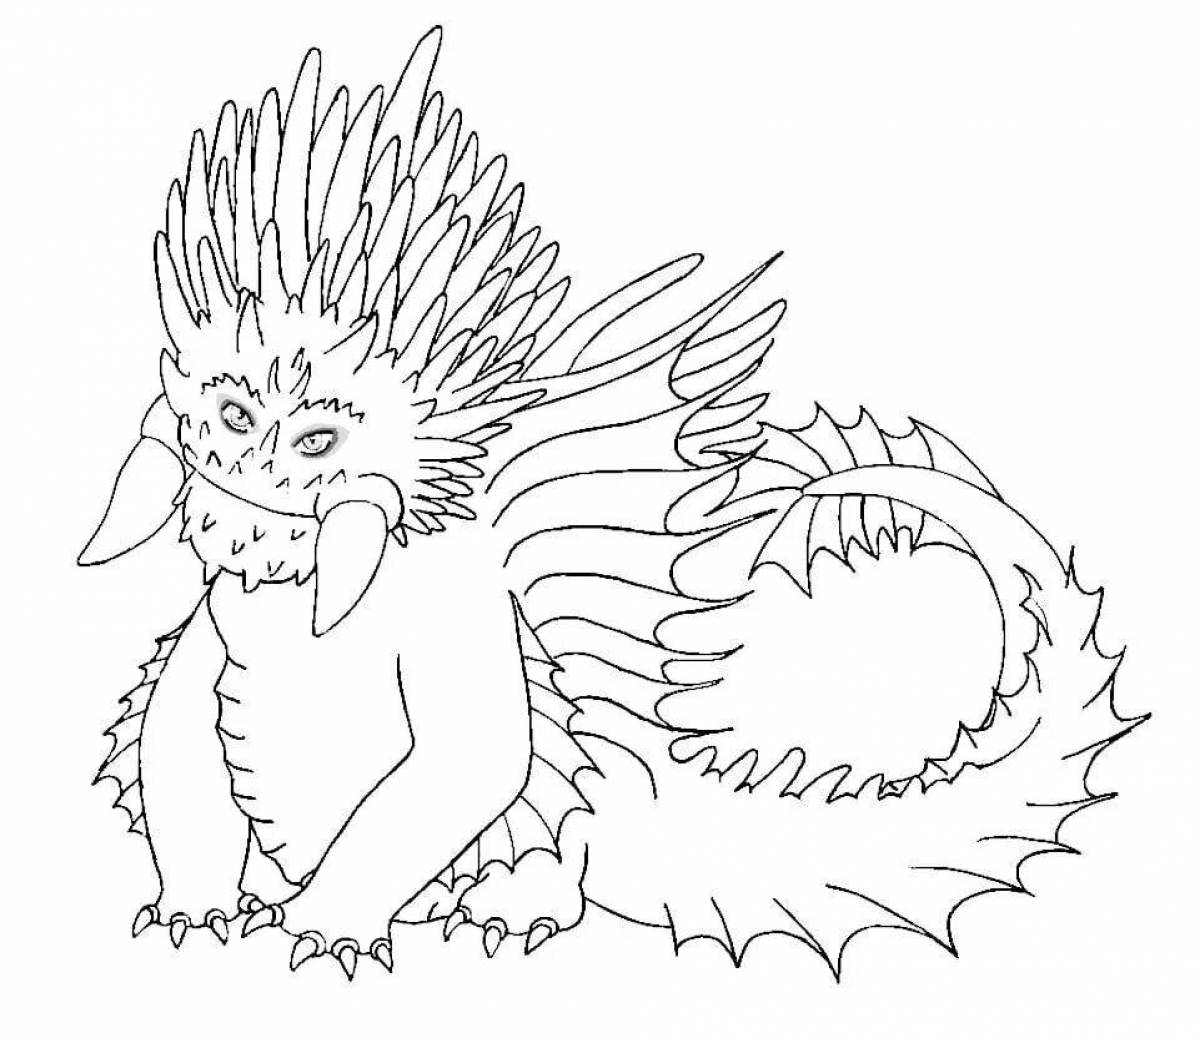 Exquisite dragon whisper coloring book